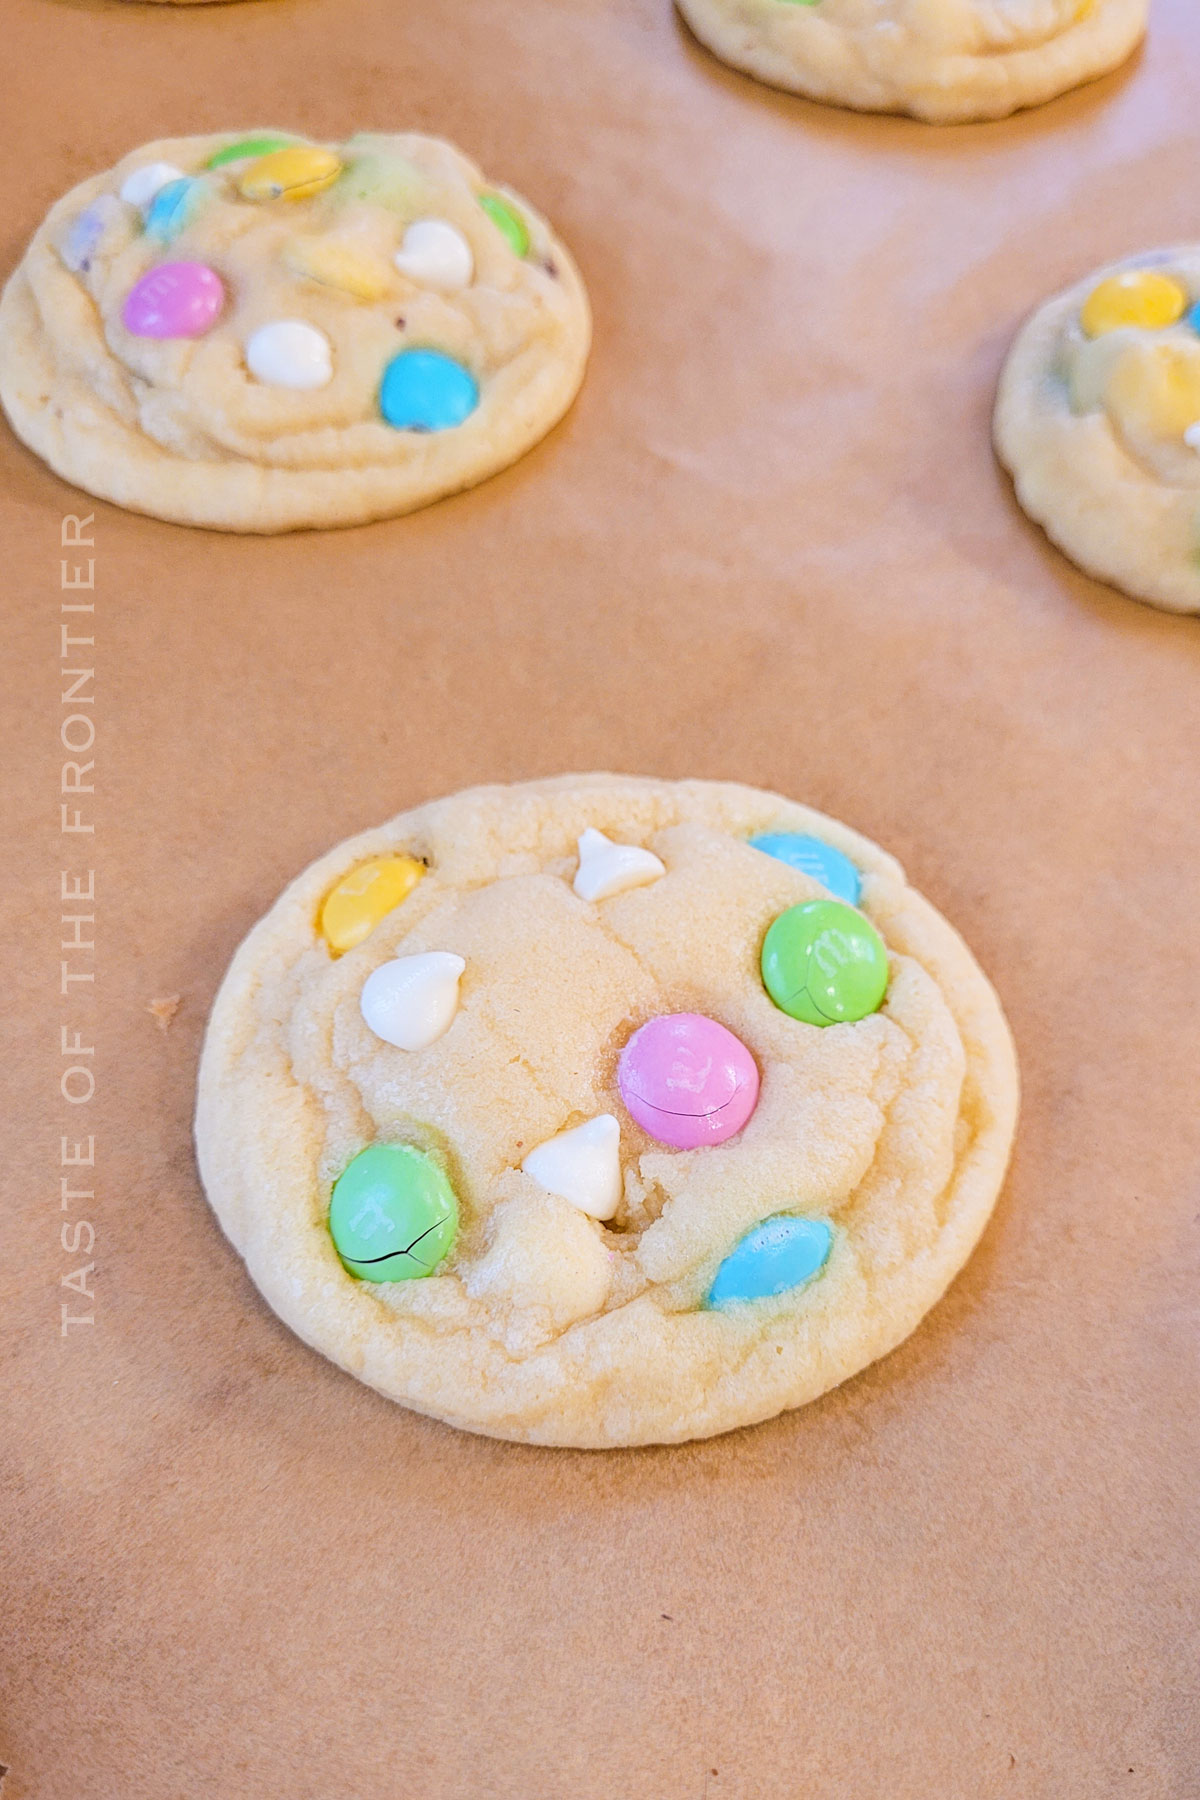 baked cookies with M&M's